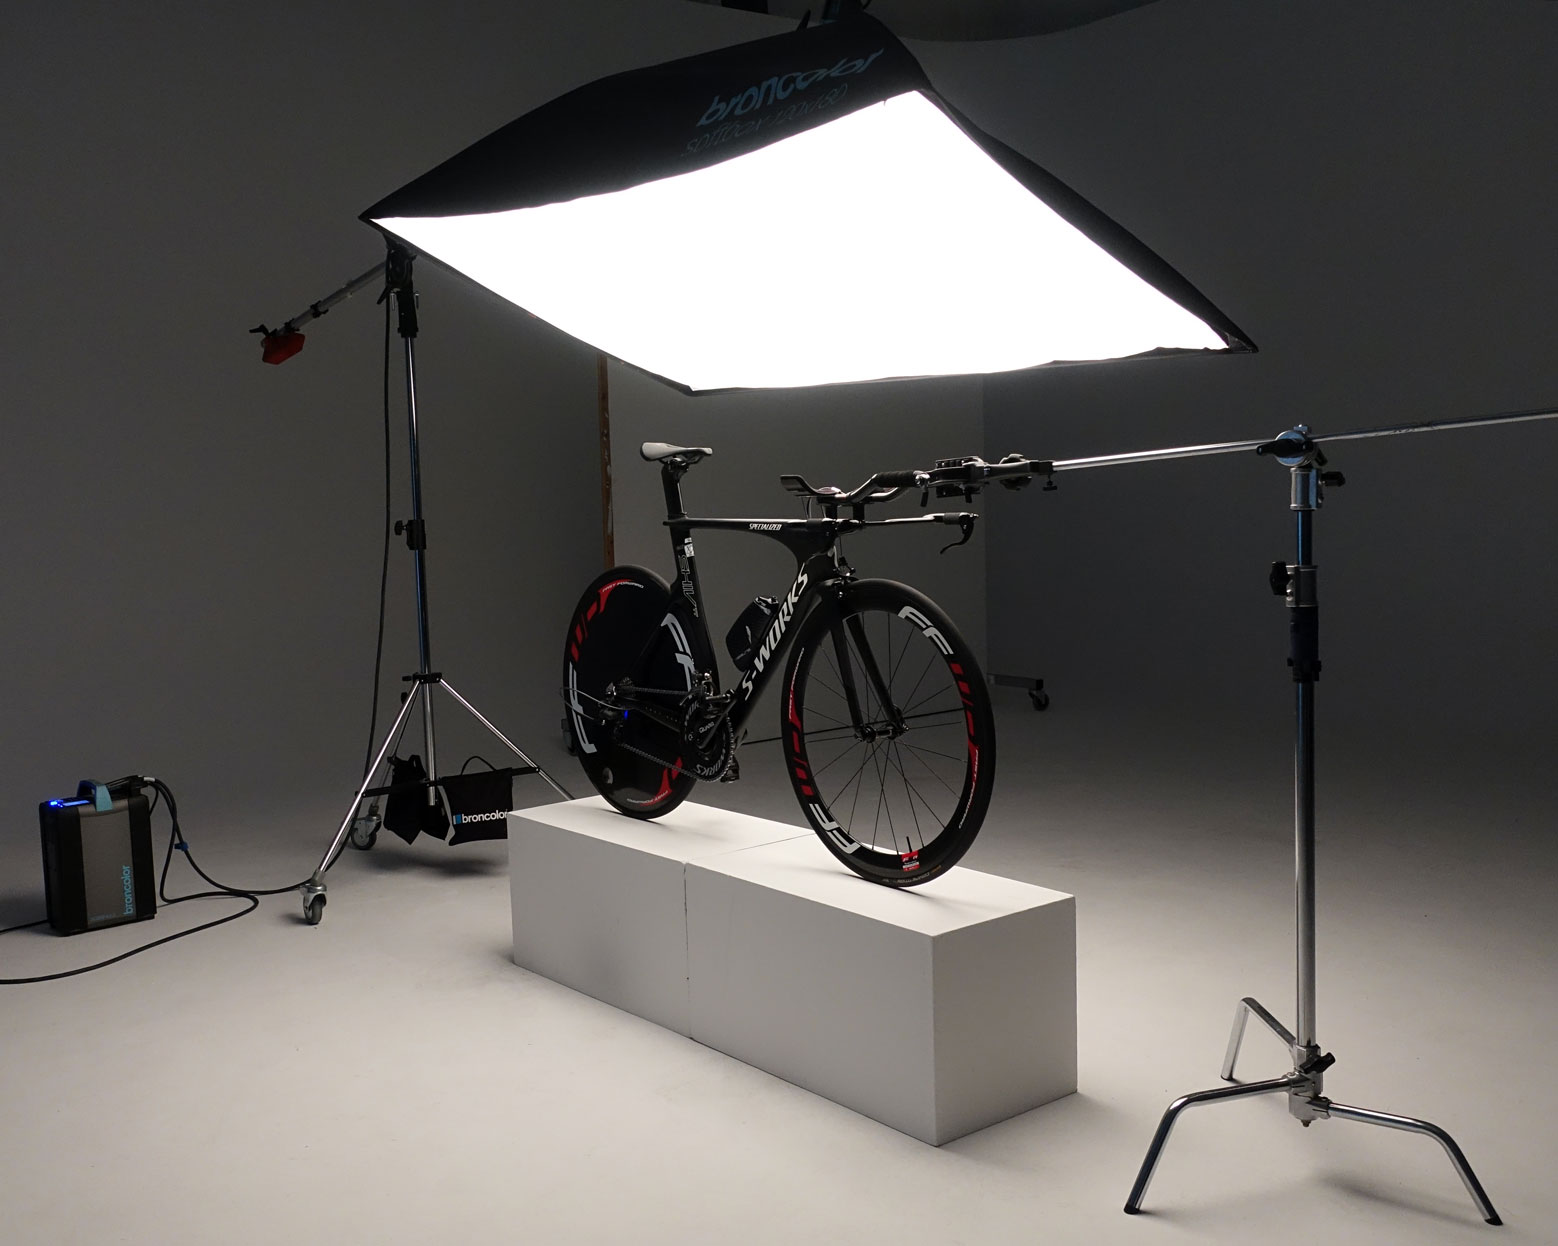 Bicycle fixed in position for product shoot